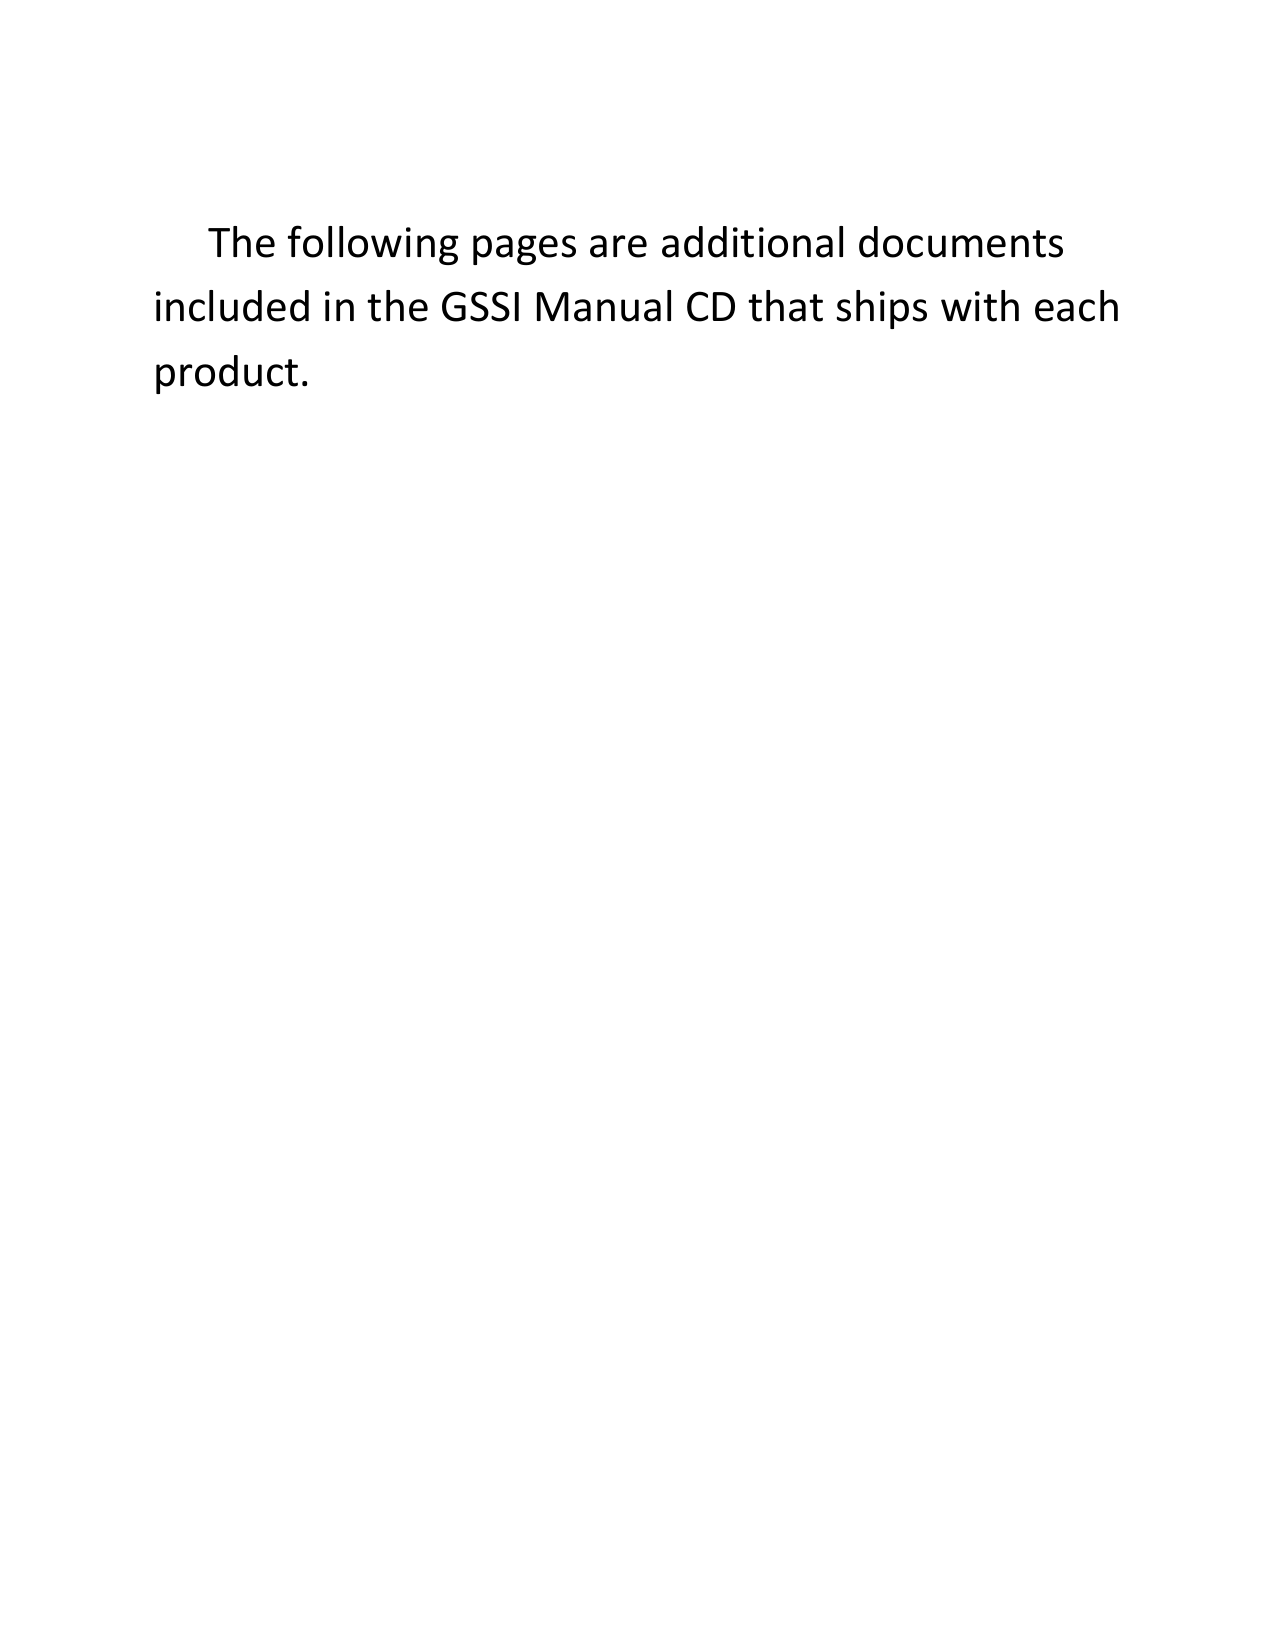         The following pages are additional documents included in the GSSI Manual CD that ships with each product.    